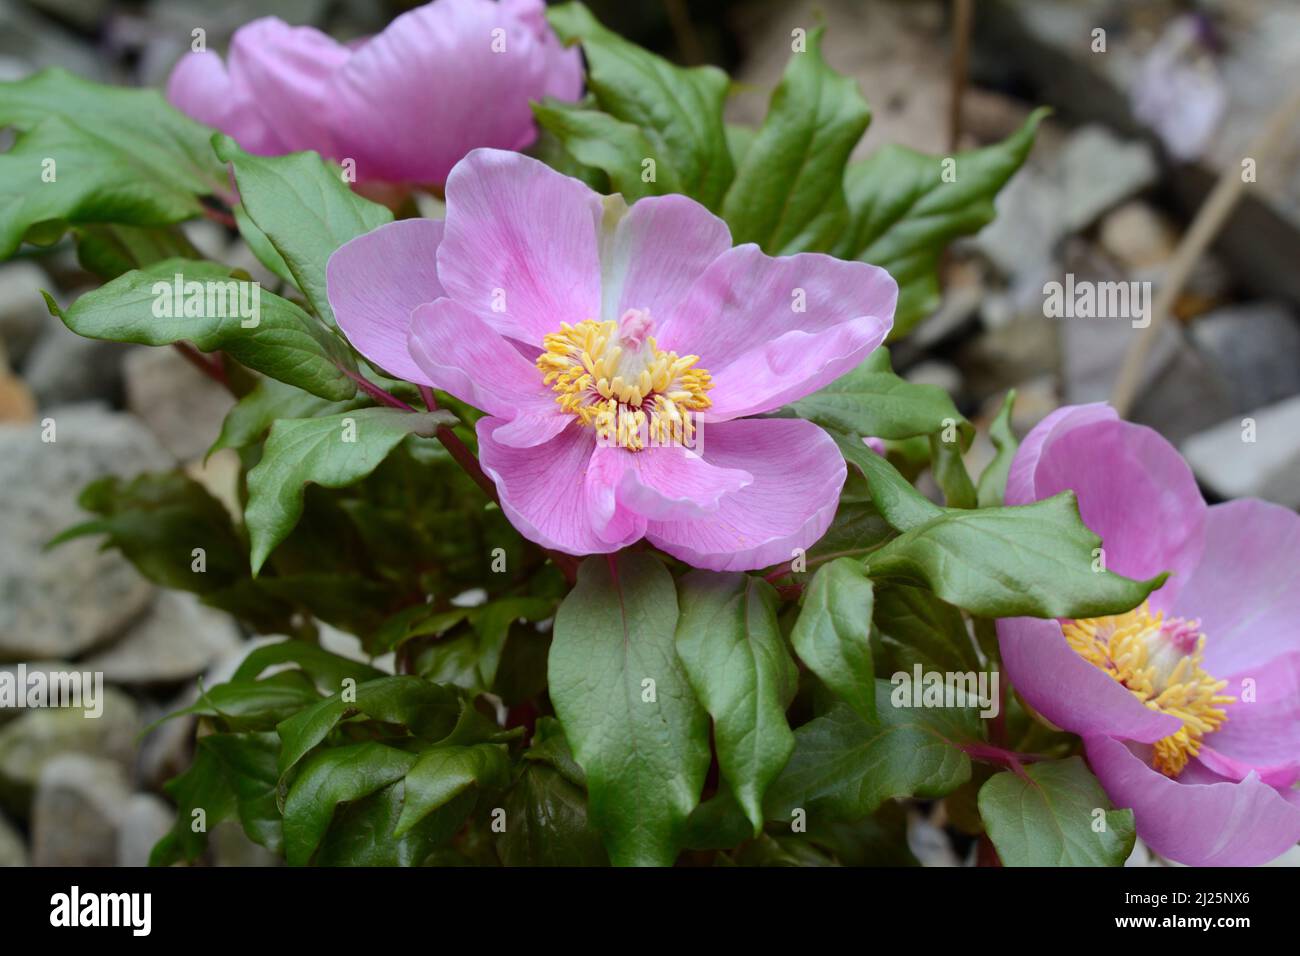 Paeonia mascula subs russoi early flowering Peony flower Stock Photo